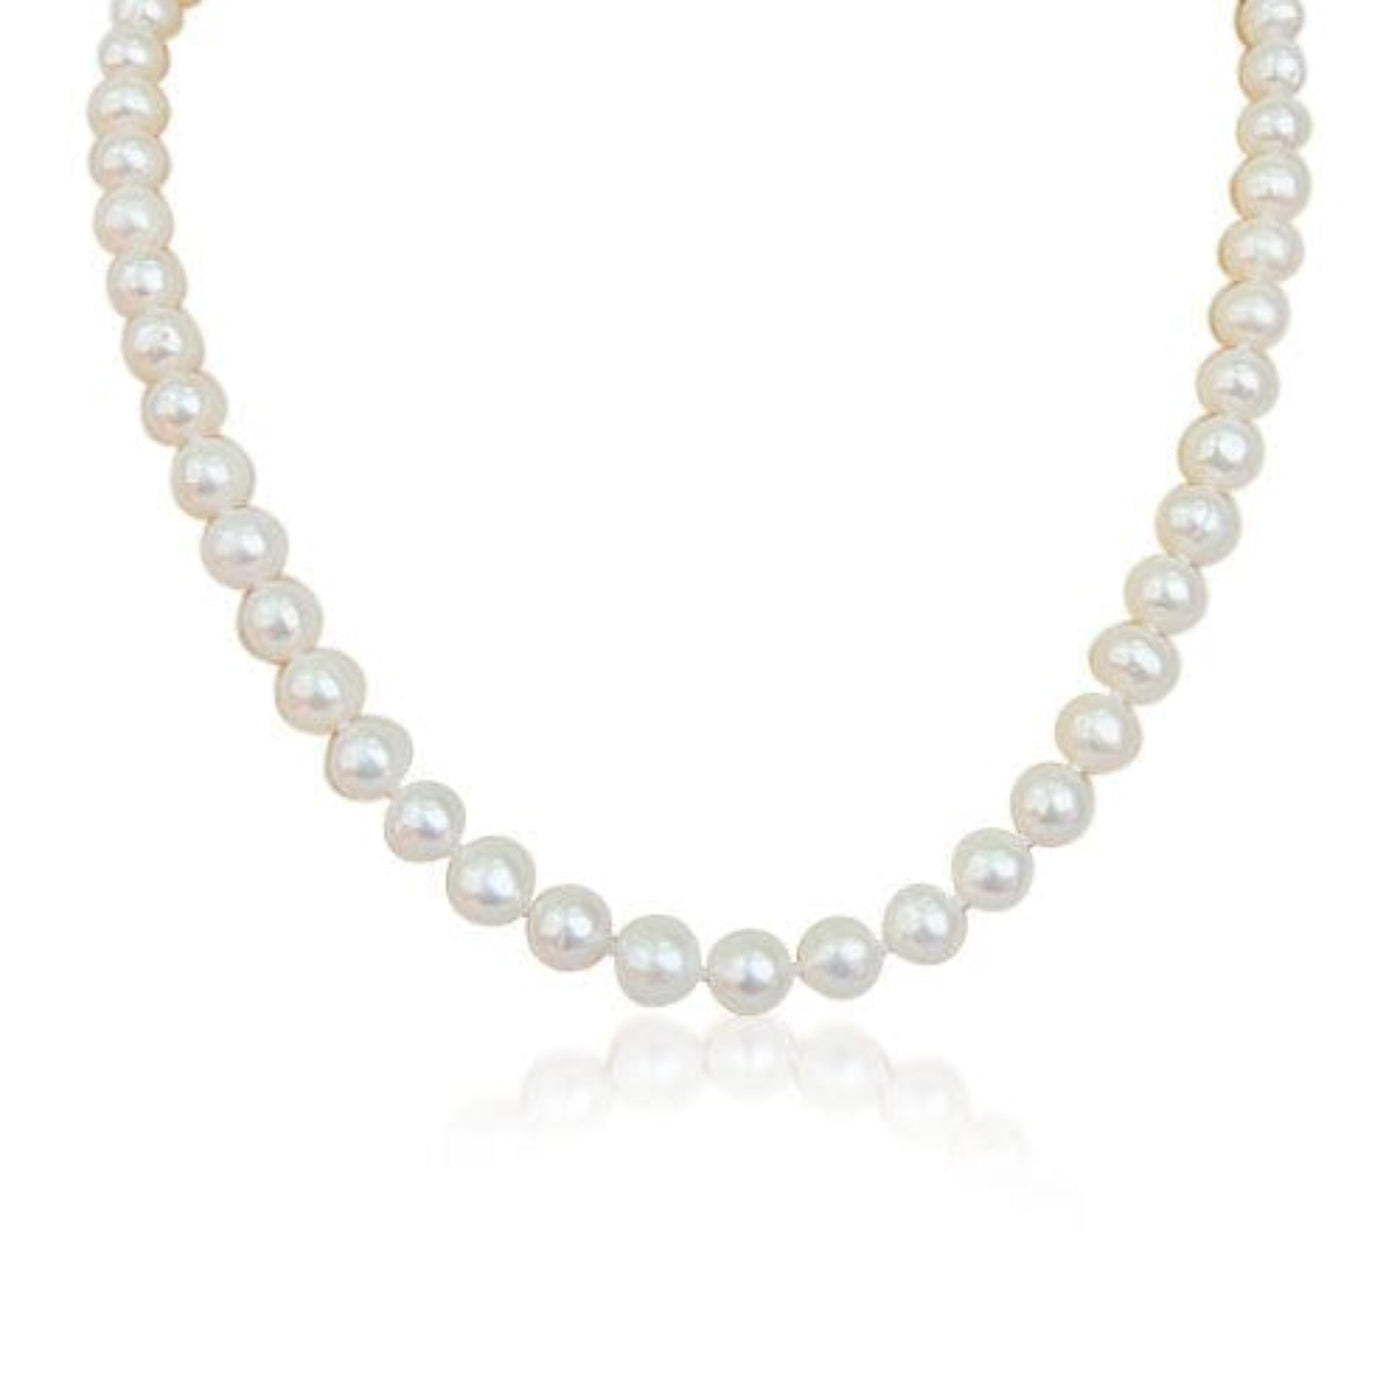 8 mm 16" Freshwater Pearls Necklace with Heart Toggle Clasp - Capsul